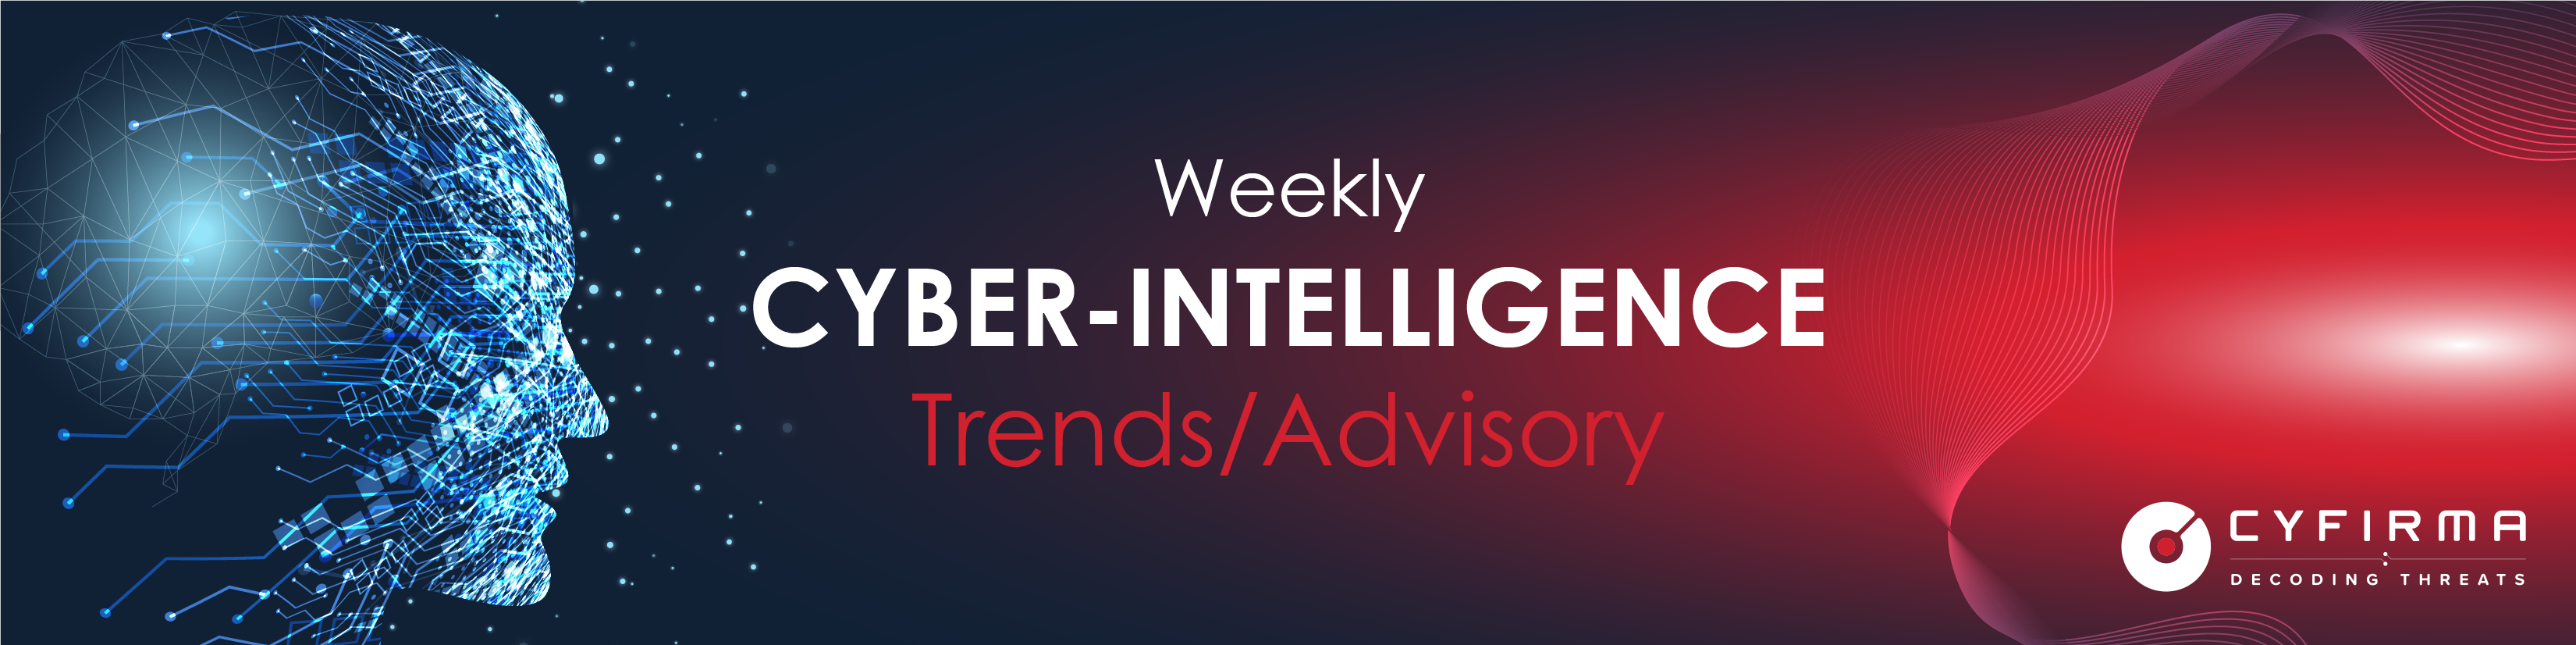 Weekly Cyber-Intelligence Trends and Advisory – 20 Feb 2022